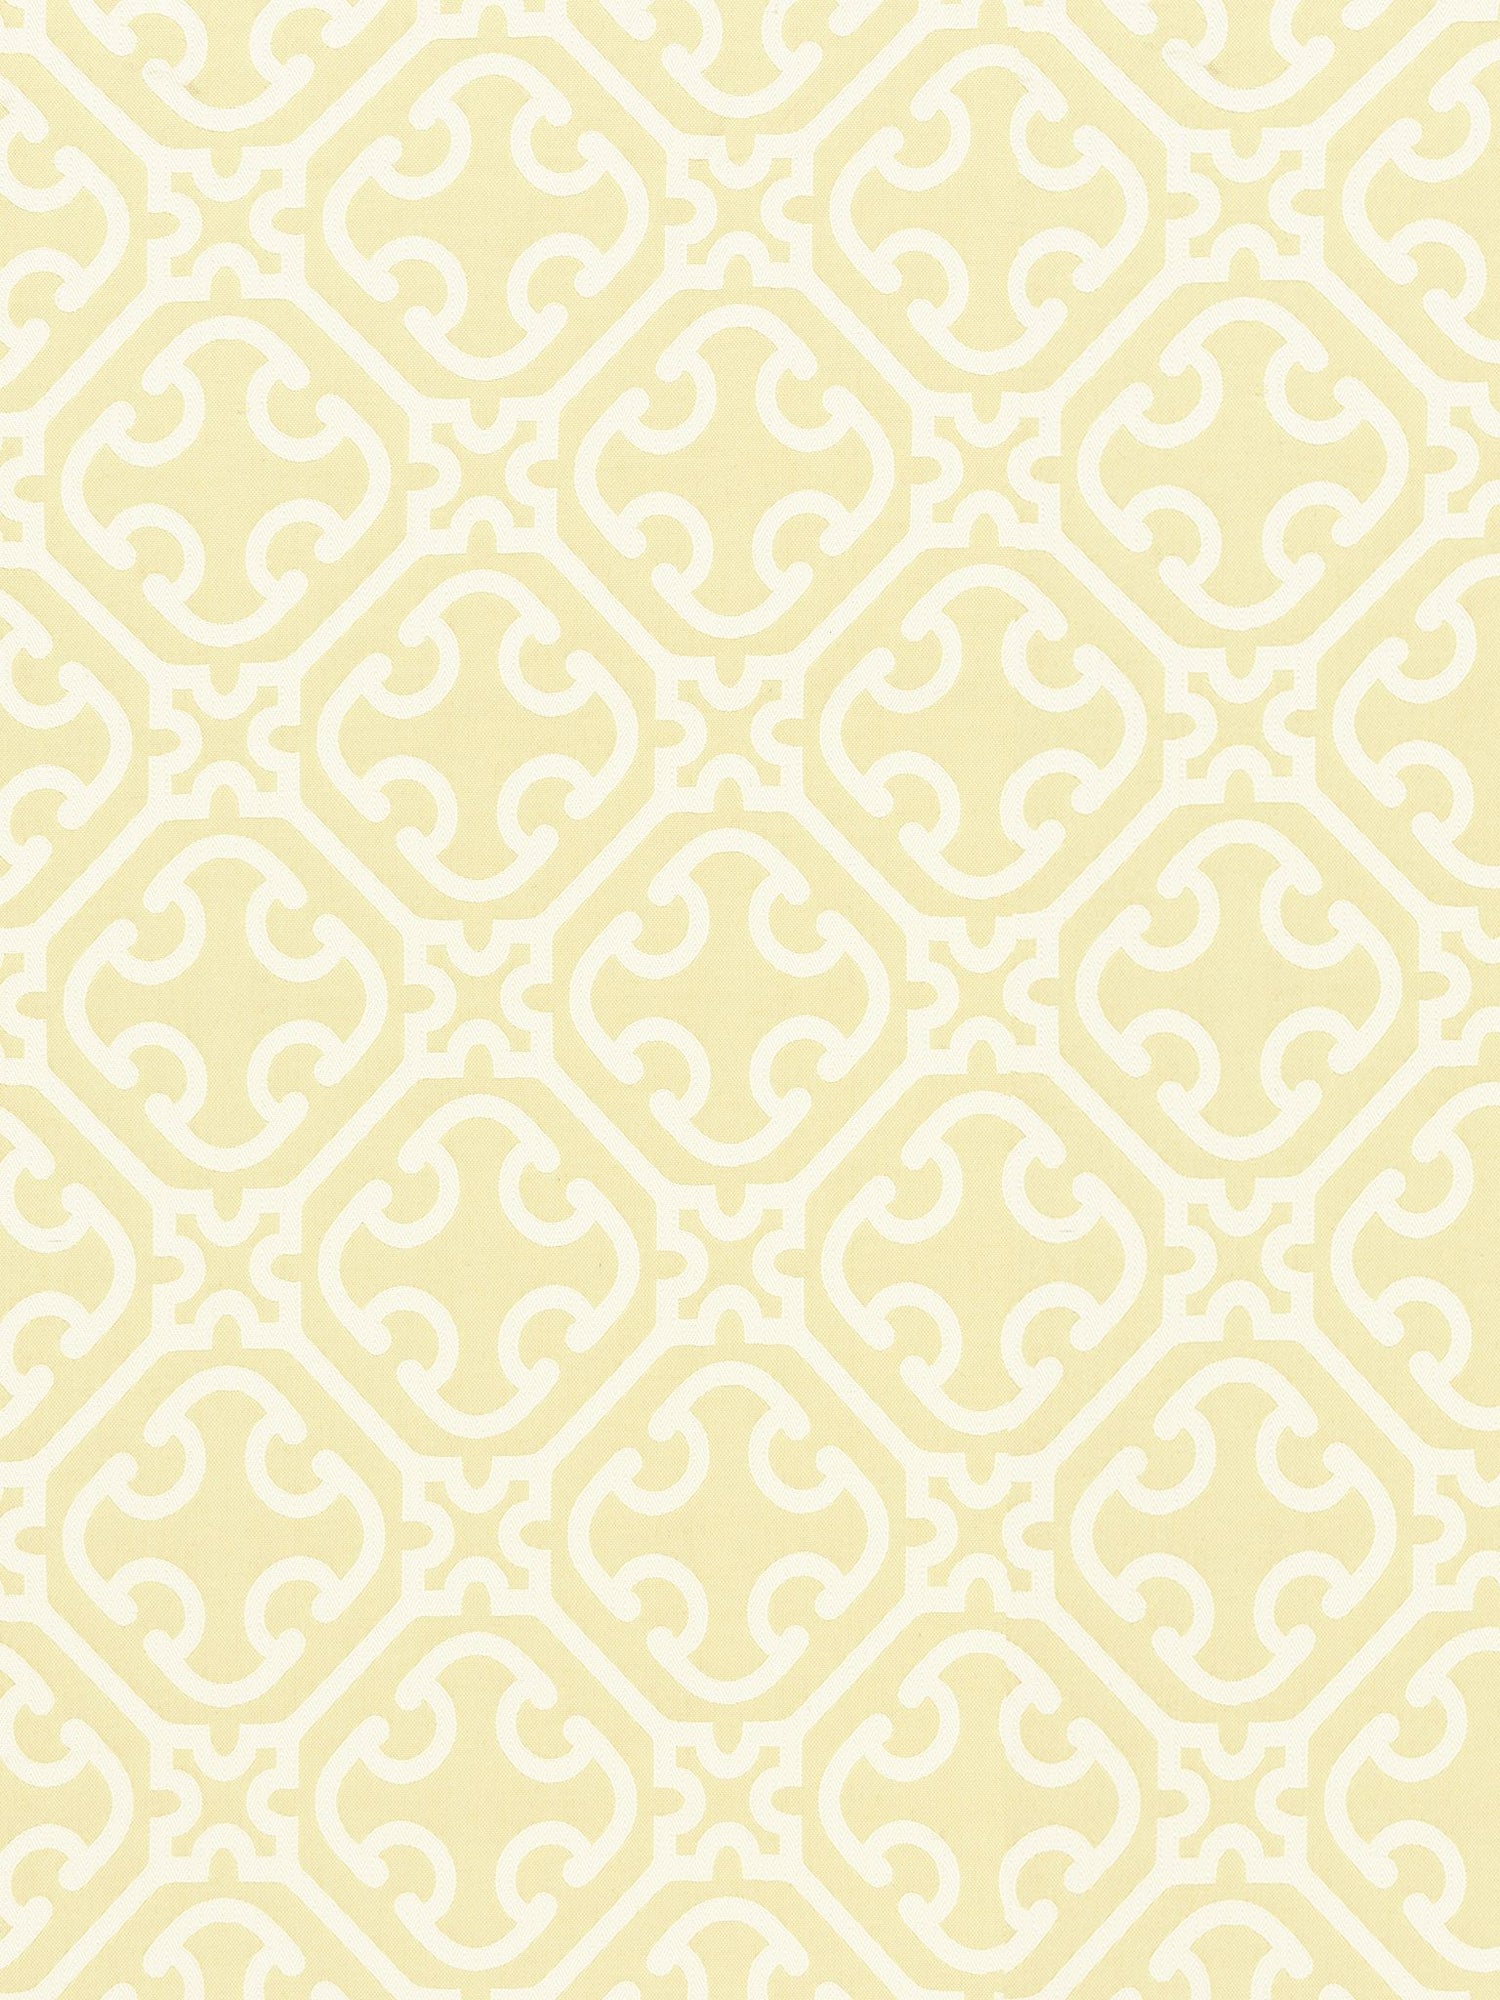 Ailin Lattice Weave fabric in canary color - pattern number SC 000227214 - by Scalamandre in the Scalamandre Fabrics Book 1 collection